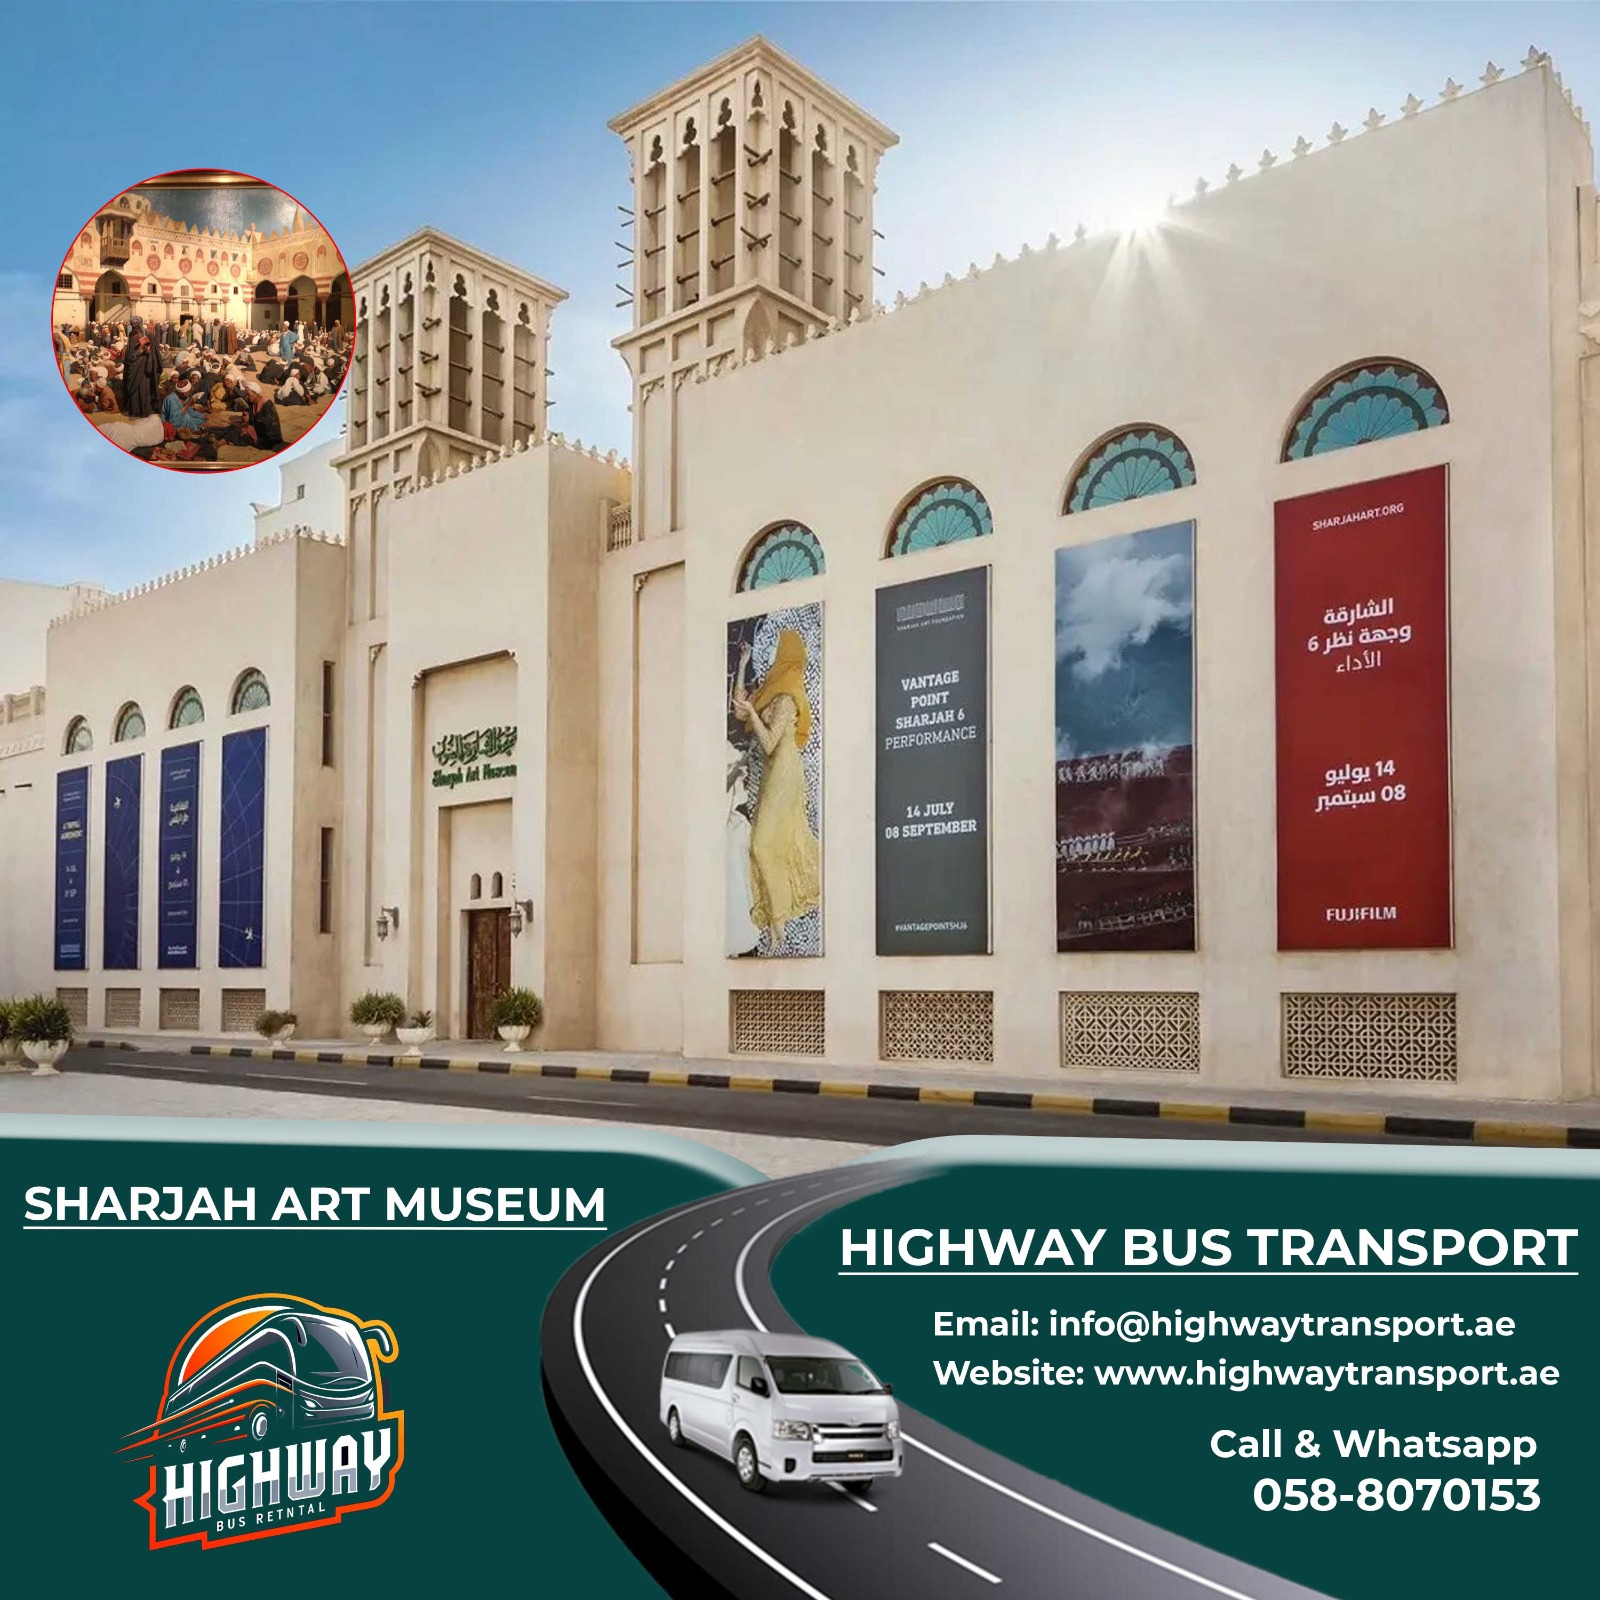 Interior of Sharjah Art Museum showcasing diverse collection of paintings and artworks